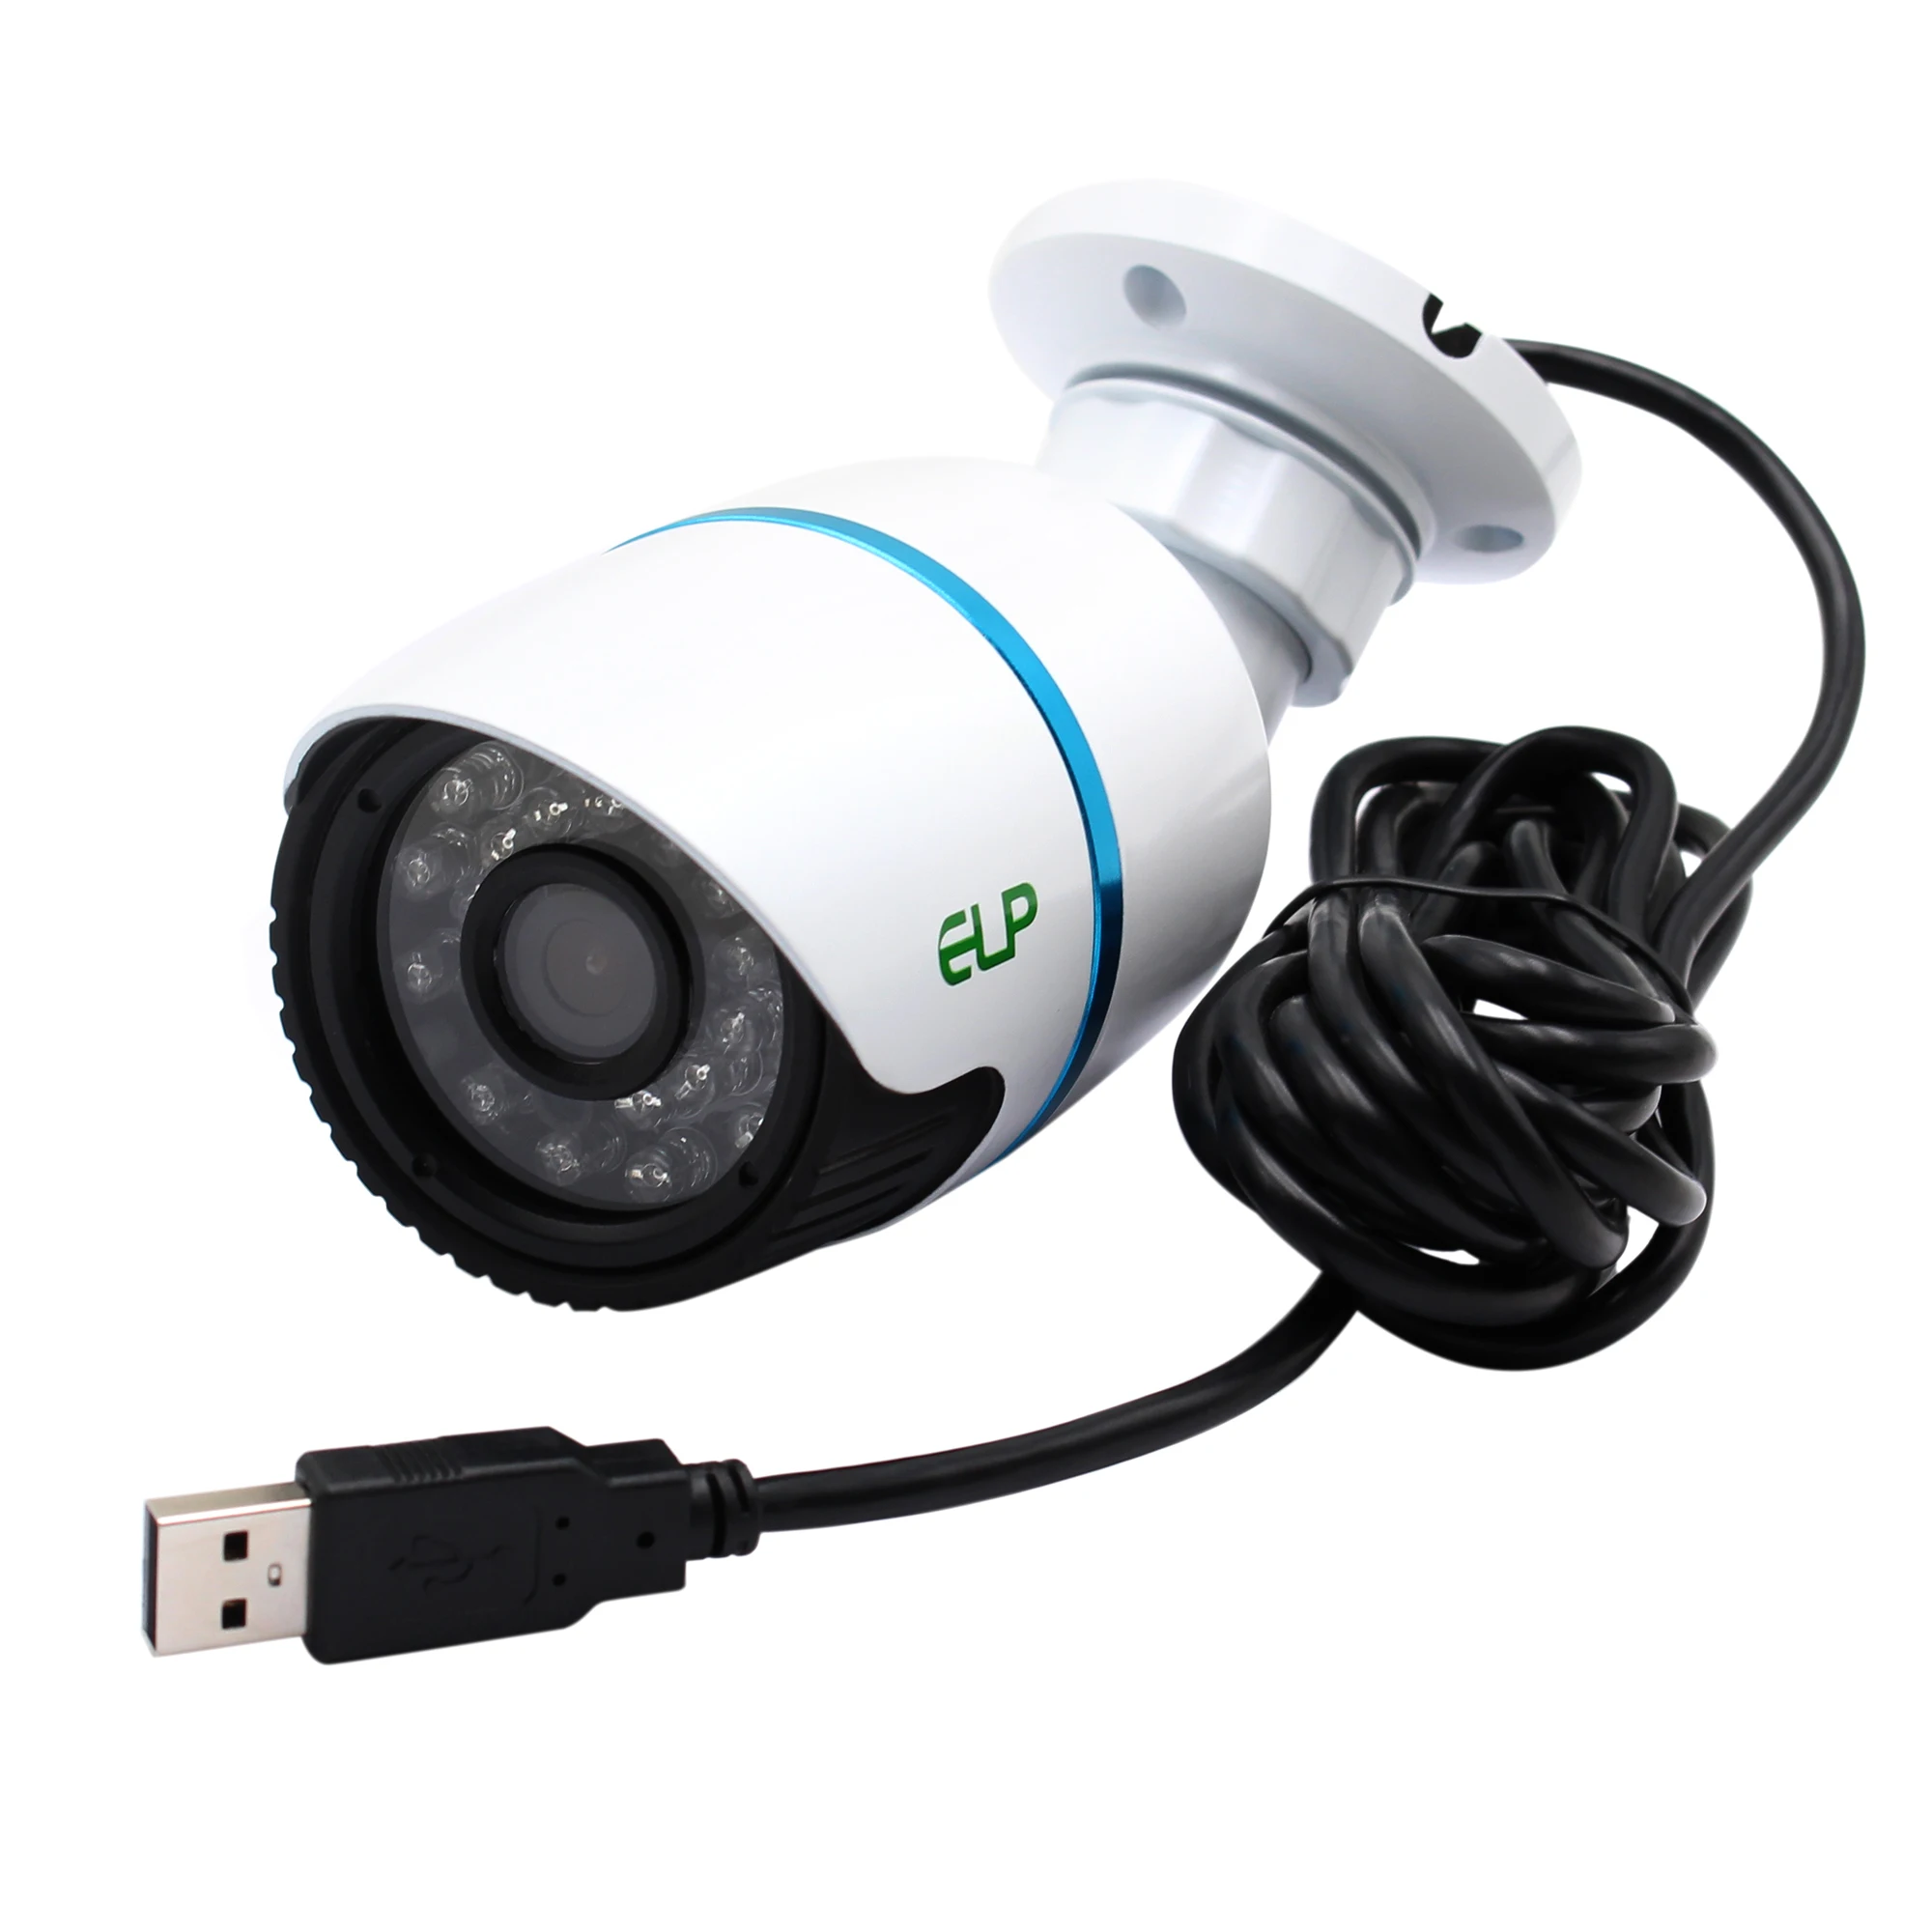 CCTV Surveillance outdoor Waterproof 2MP H.264  IMX323 Low light Night Vision USB Webcam Camera for Home office Security, 